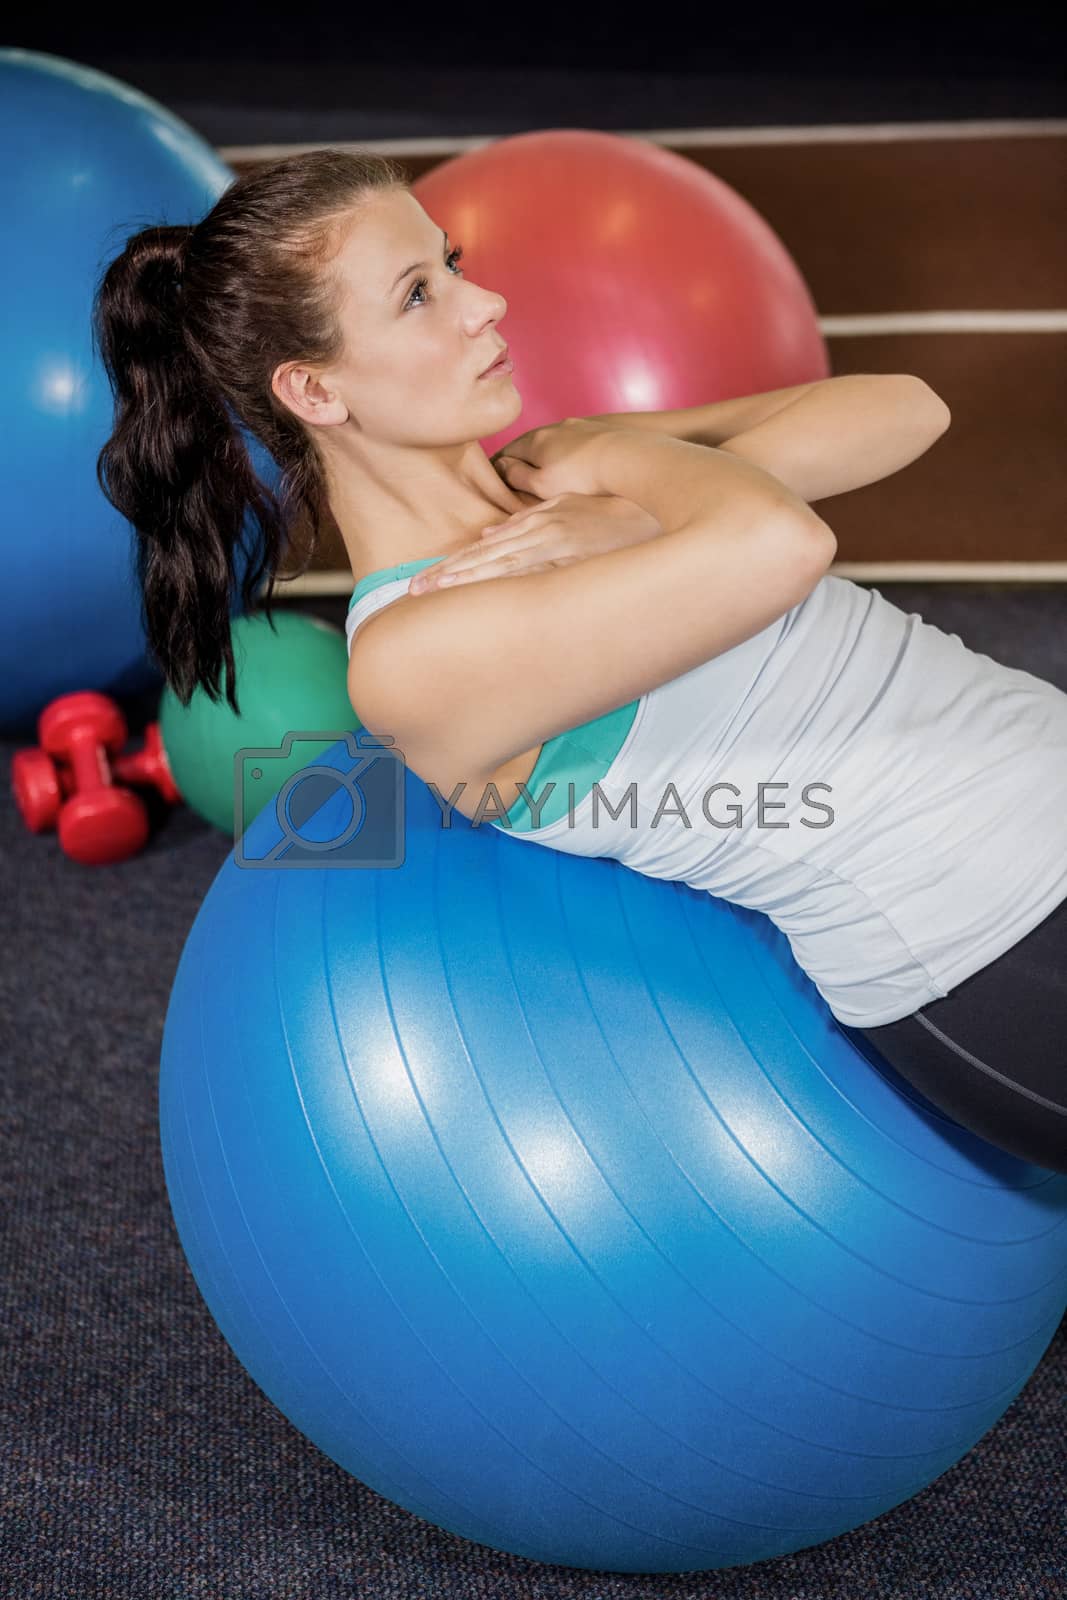 Royalty free image of Woman working out on fitness ball by Wavebreakmedia